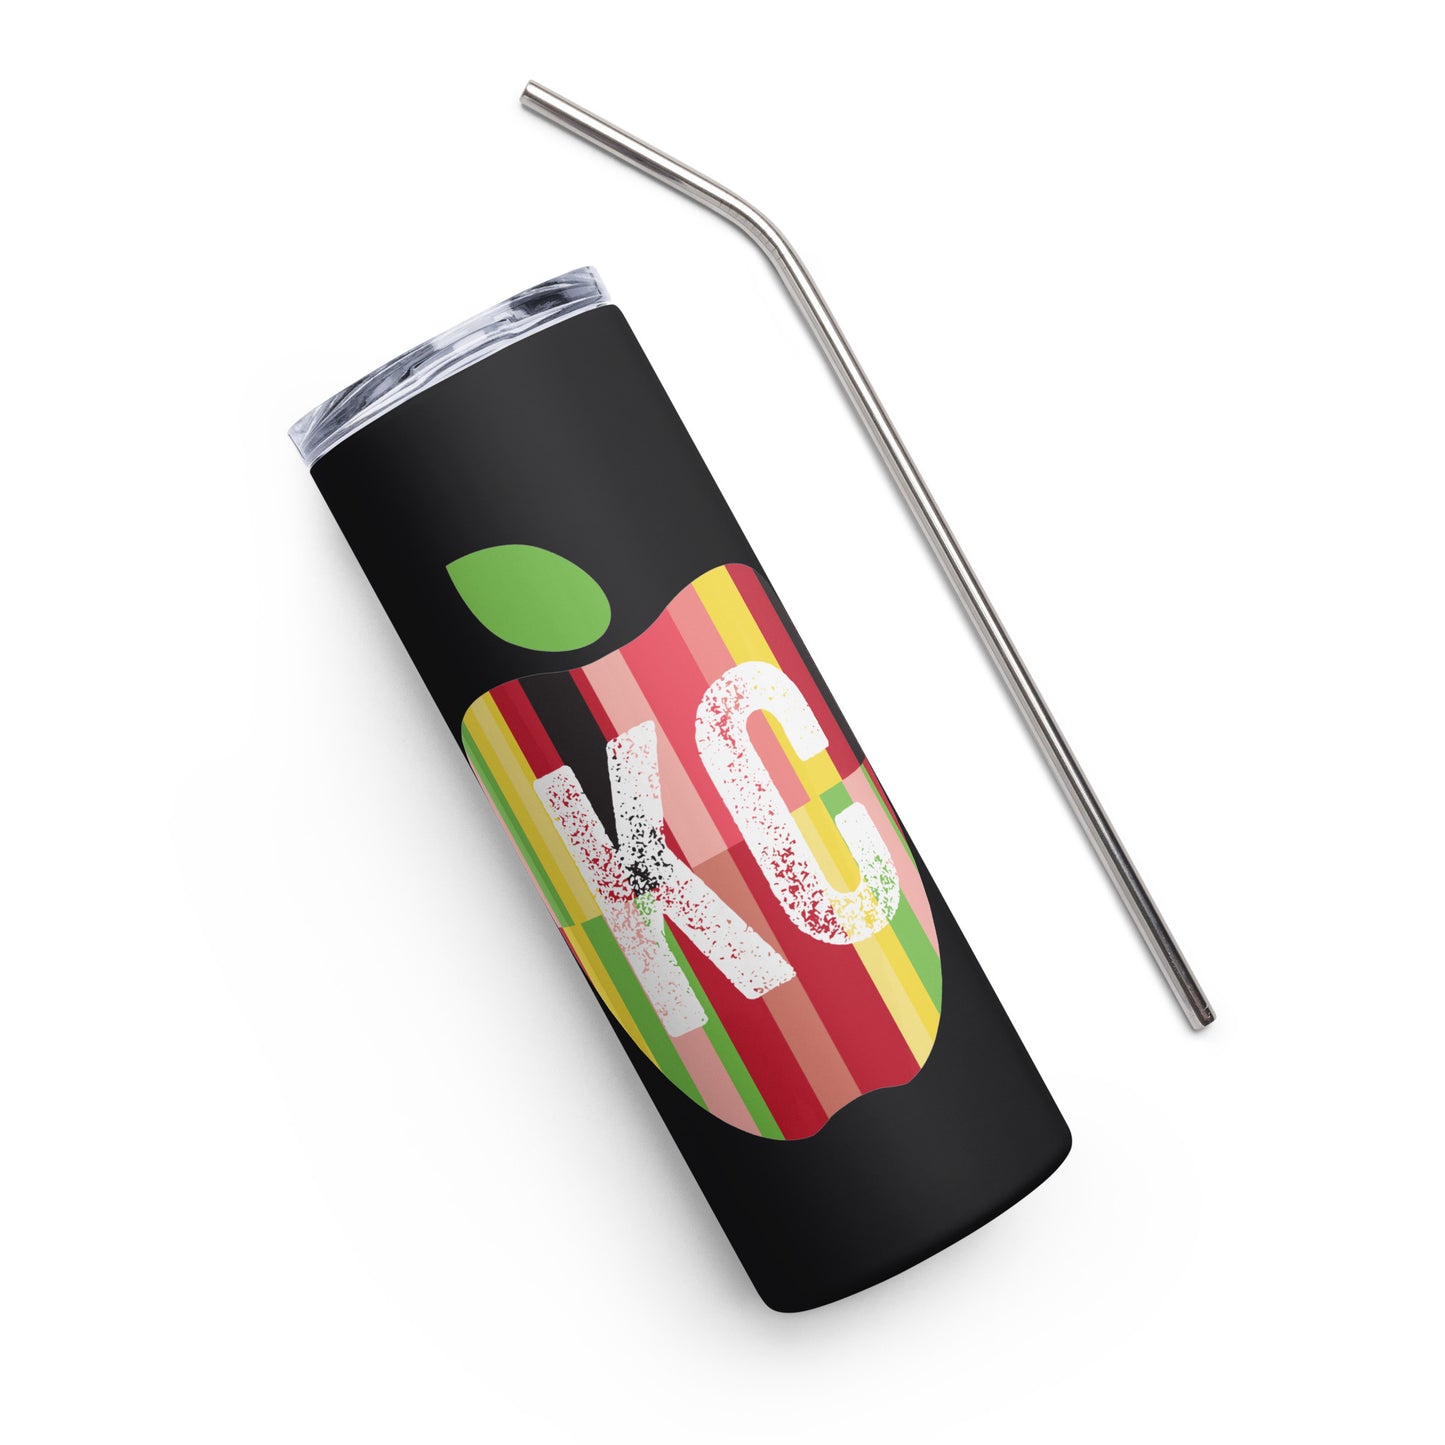 Show Me Apple Stainless steel tumbler